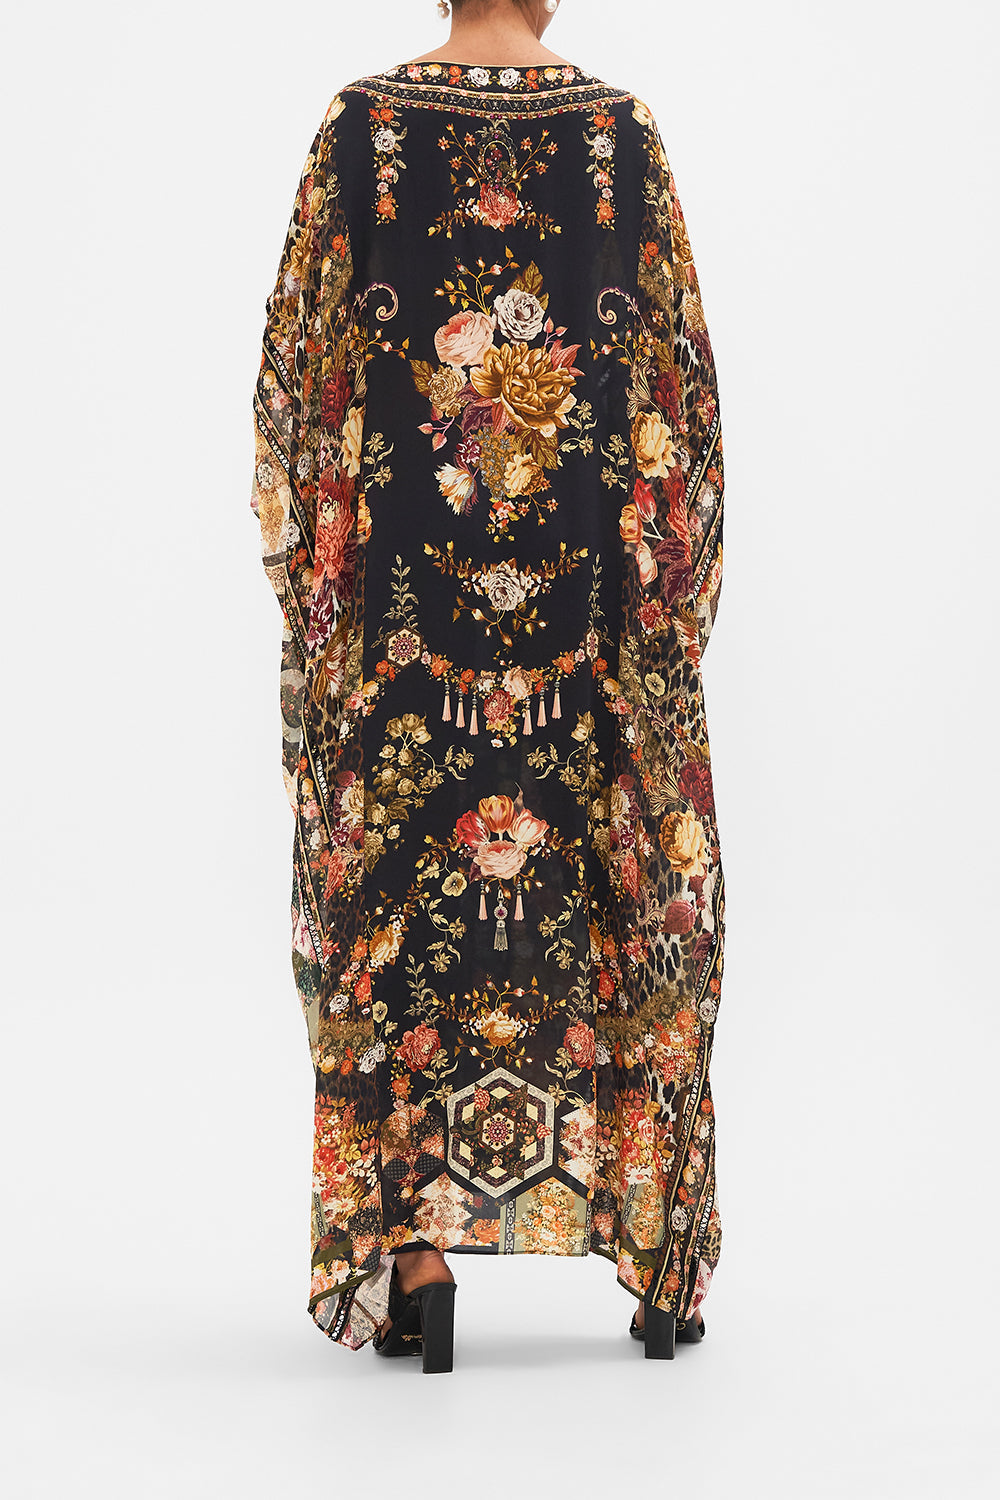 CAMILLA floral Spliced Kaftan in Stitched in Time